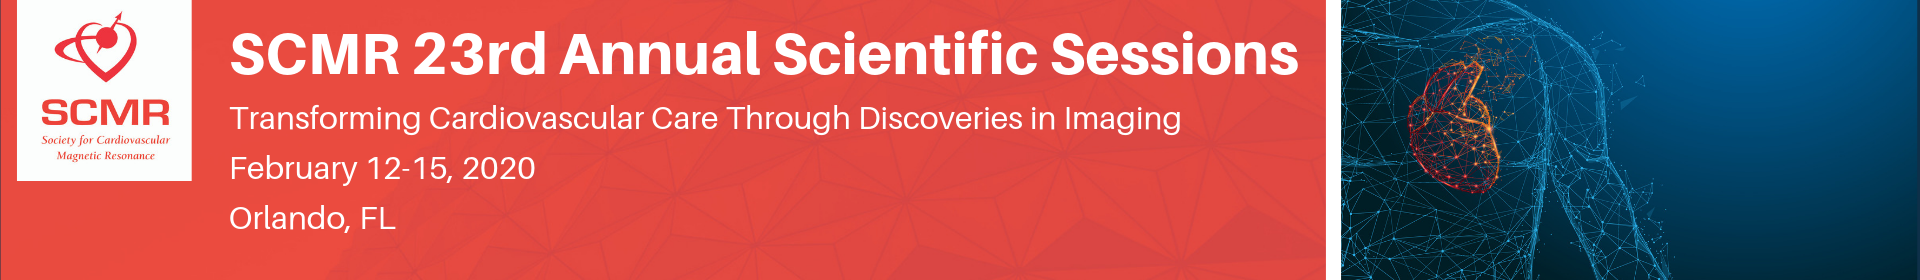 SCMR 23rd Annual Scientific Sessions Event Banner